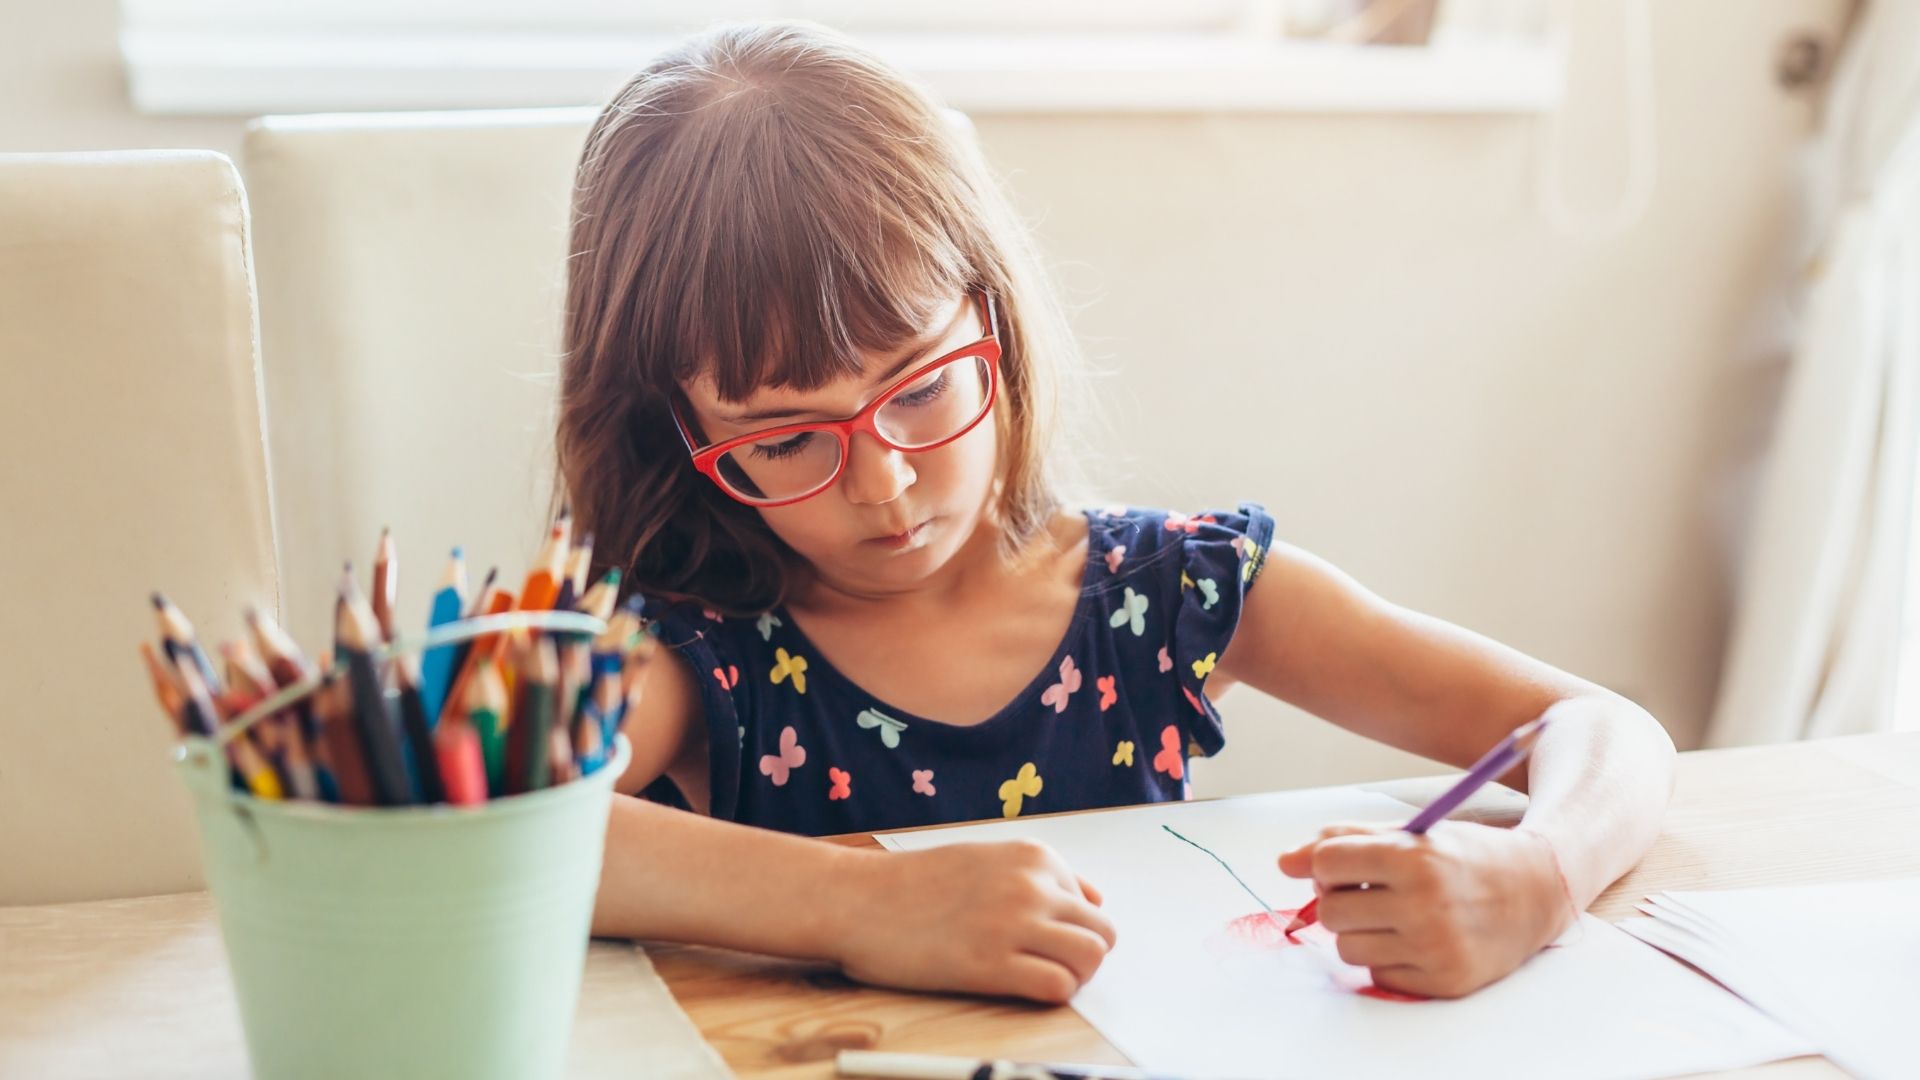 what are the risks of myopia in children?